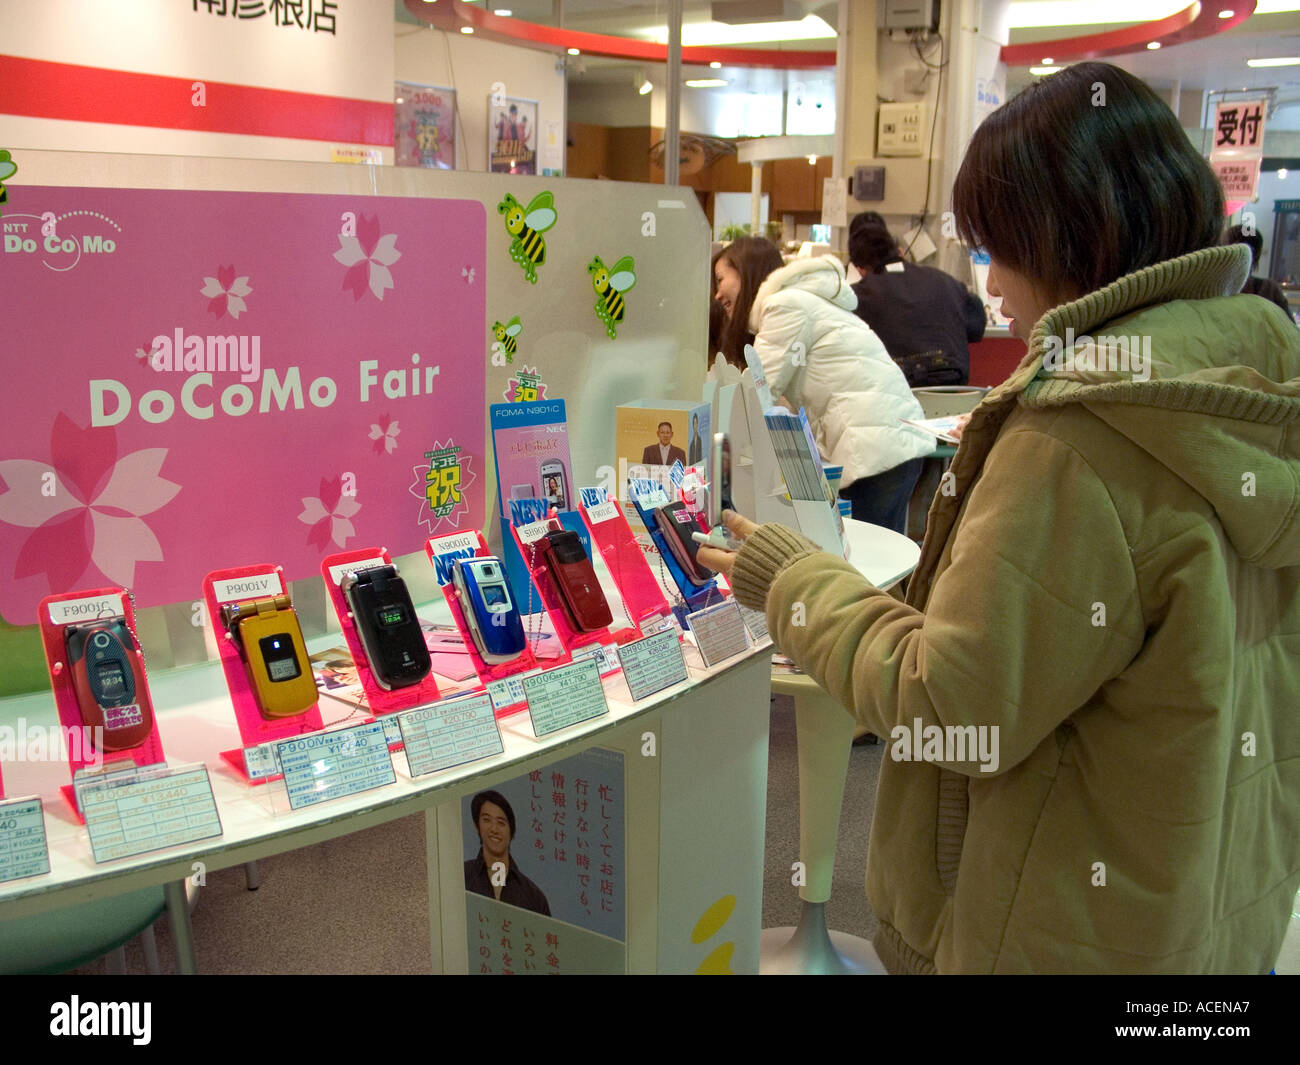 Customer inspecting the latest in mobile telephone technology at Japanese department store DoCoMo cell phone display counter Stock Photo